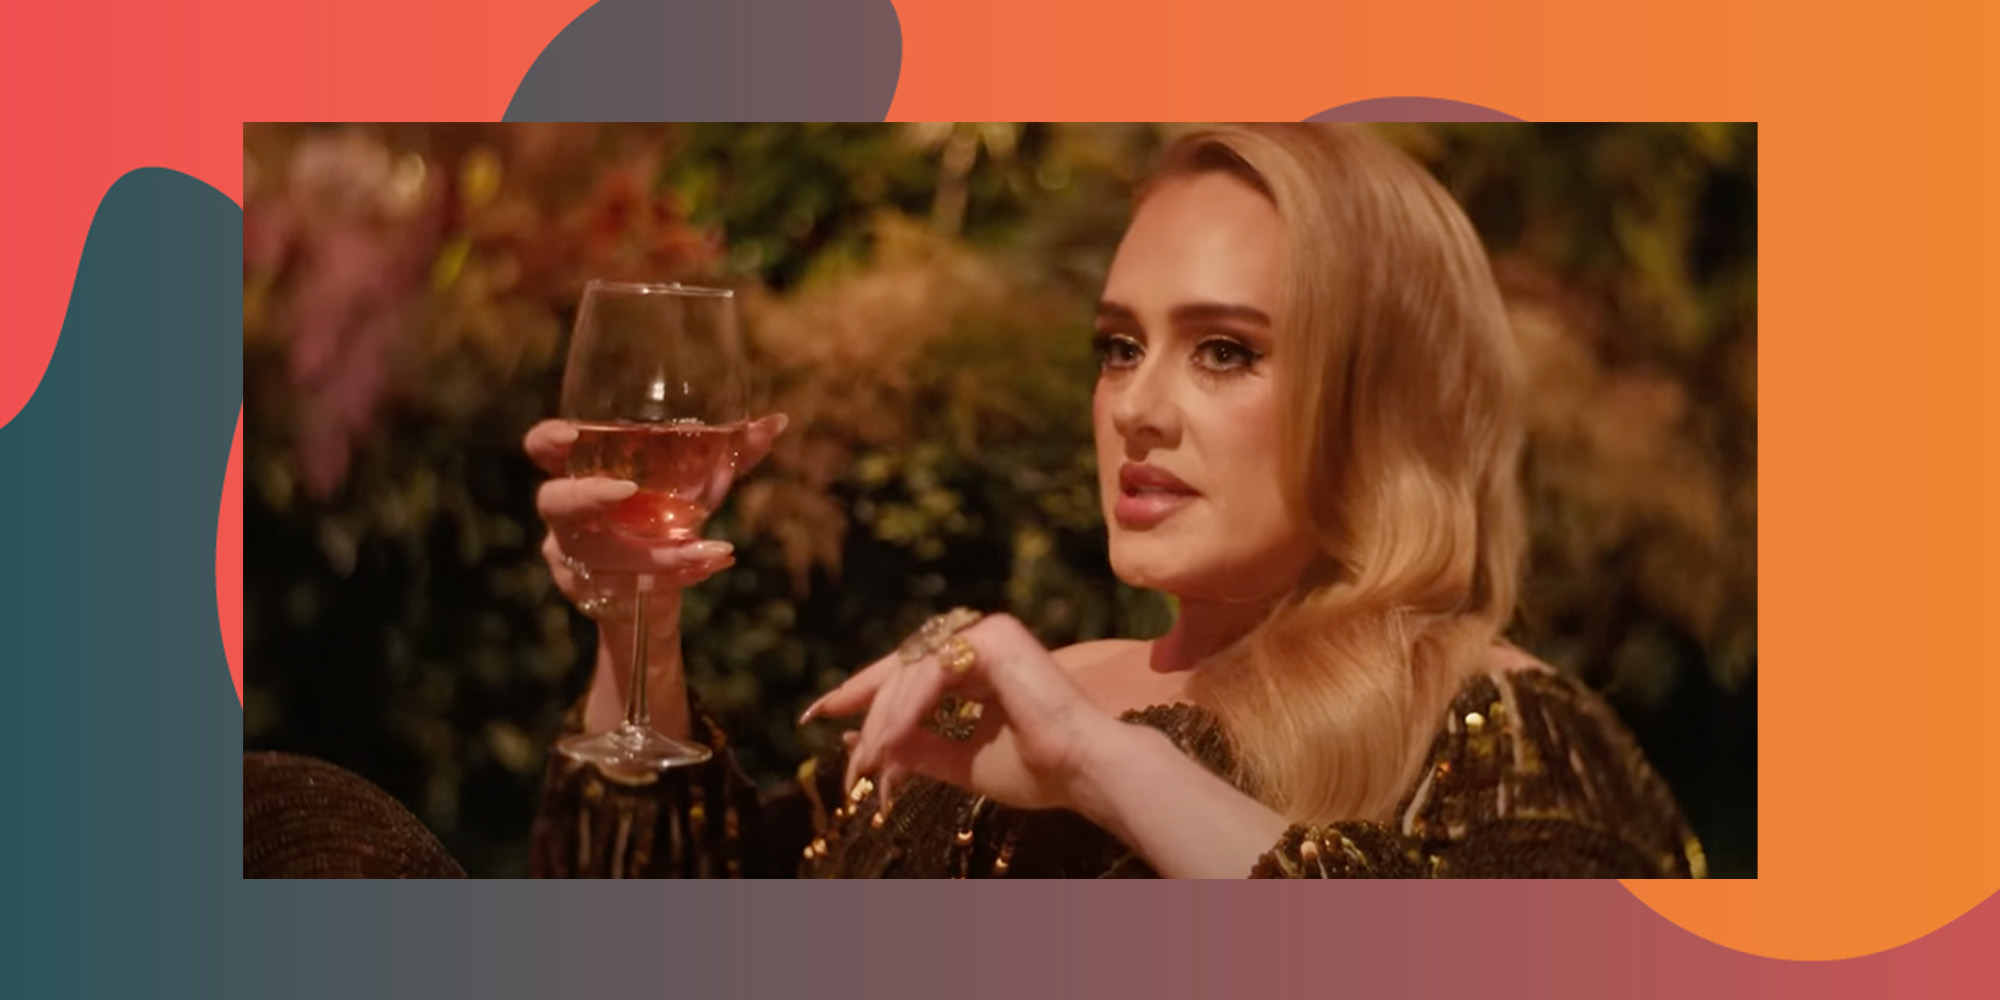 Adele, She’s Just Like Us: Singer Declares ‘I Drink Wine’ in New Music Video